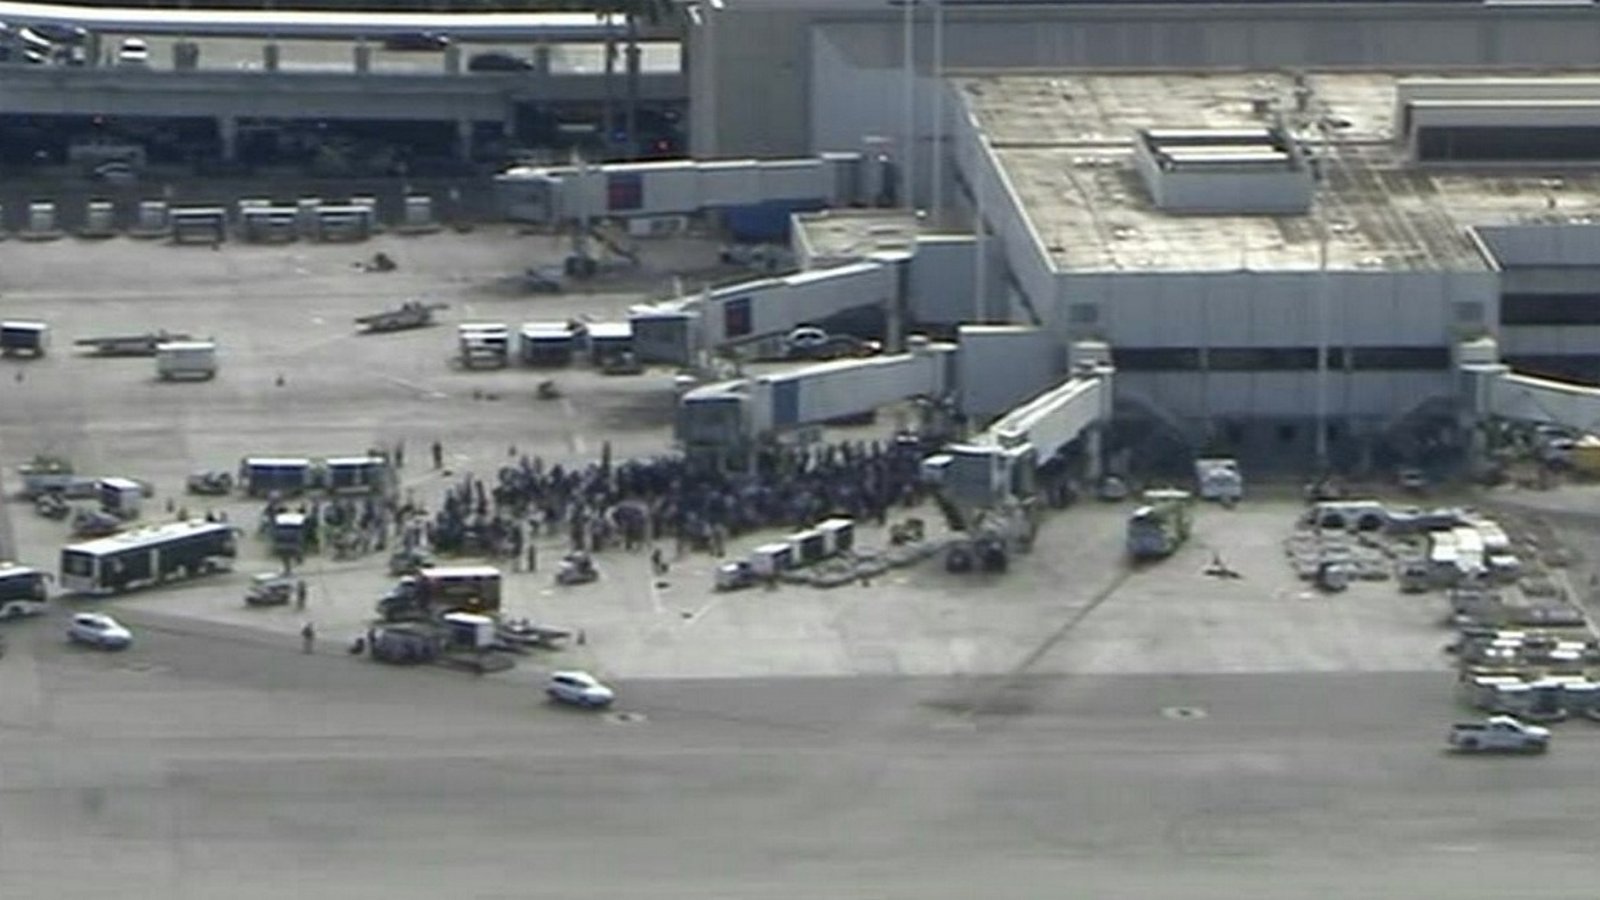 Breaking: Former NHLer one of the survivors of today's attack at Ft. Lauderdale Airport.